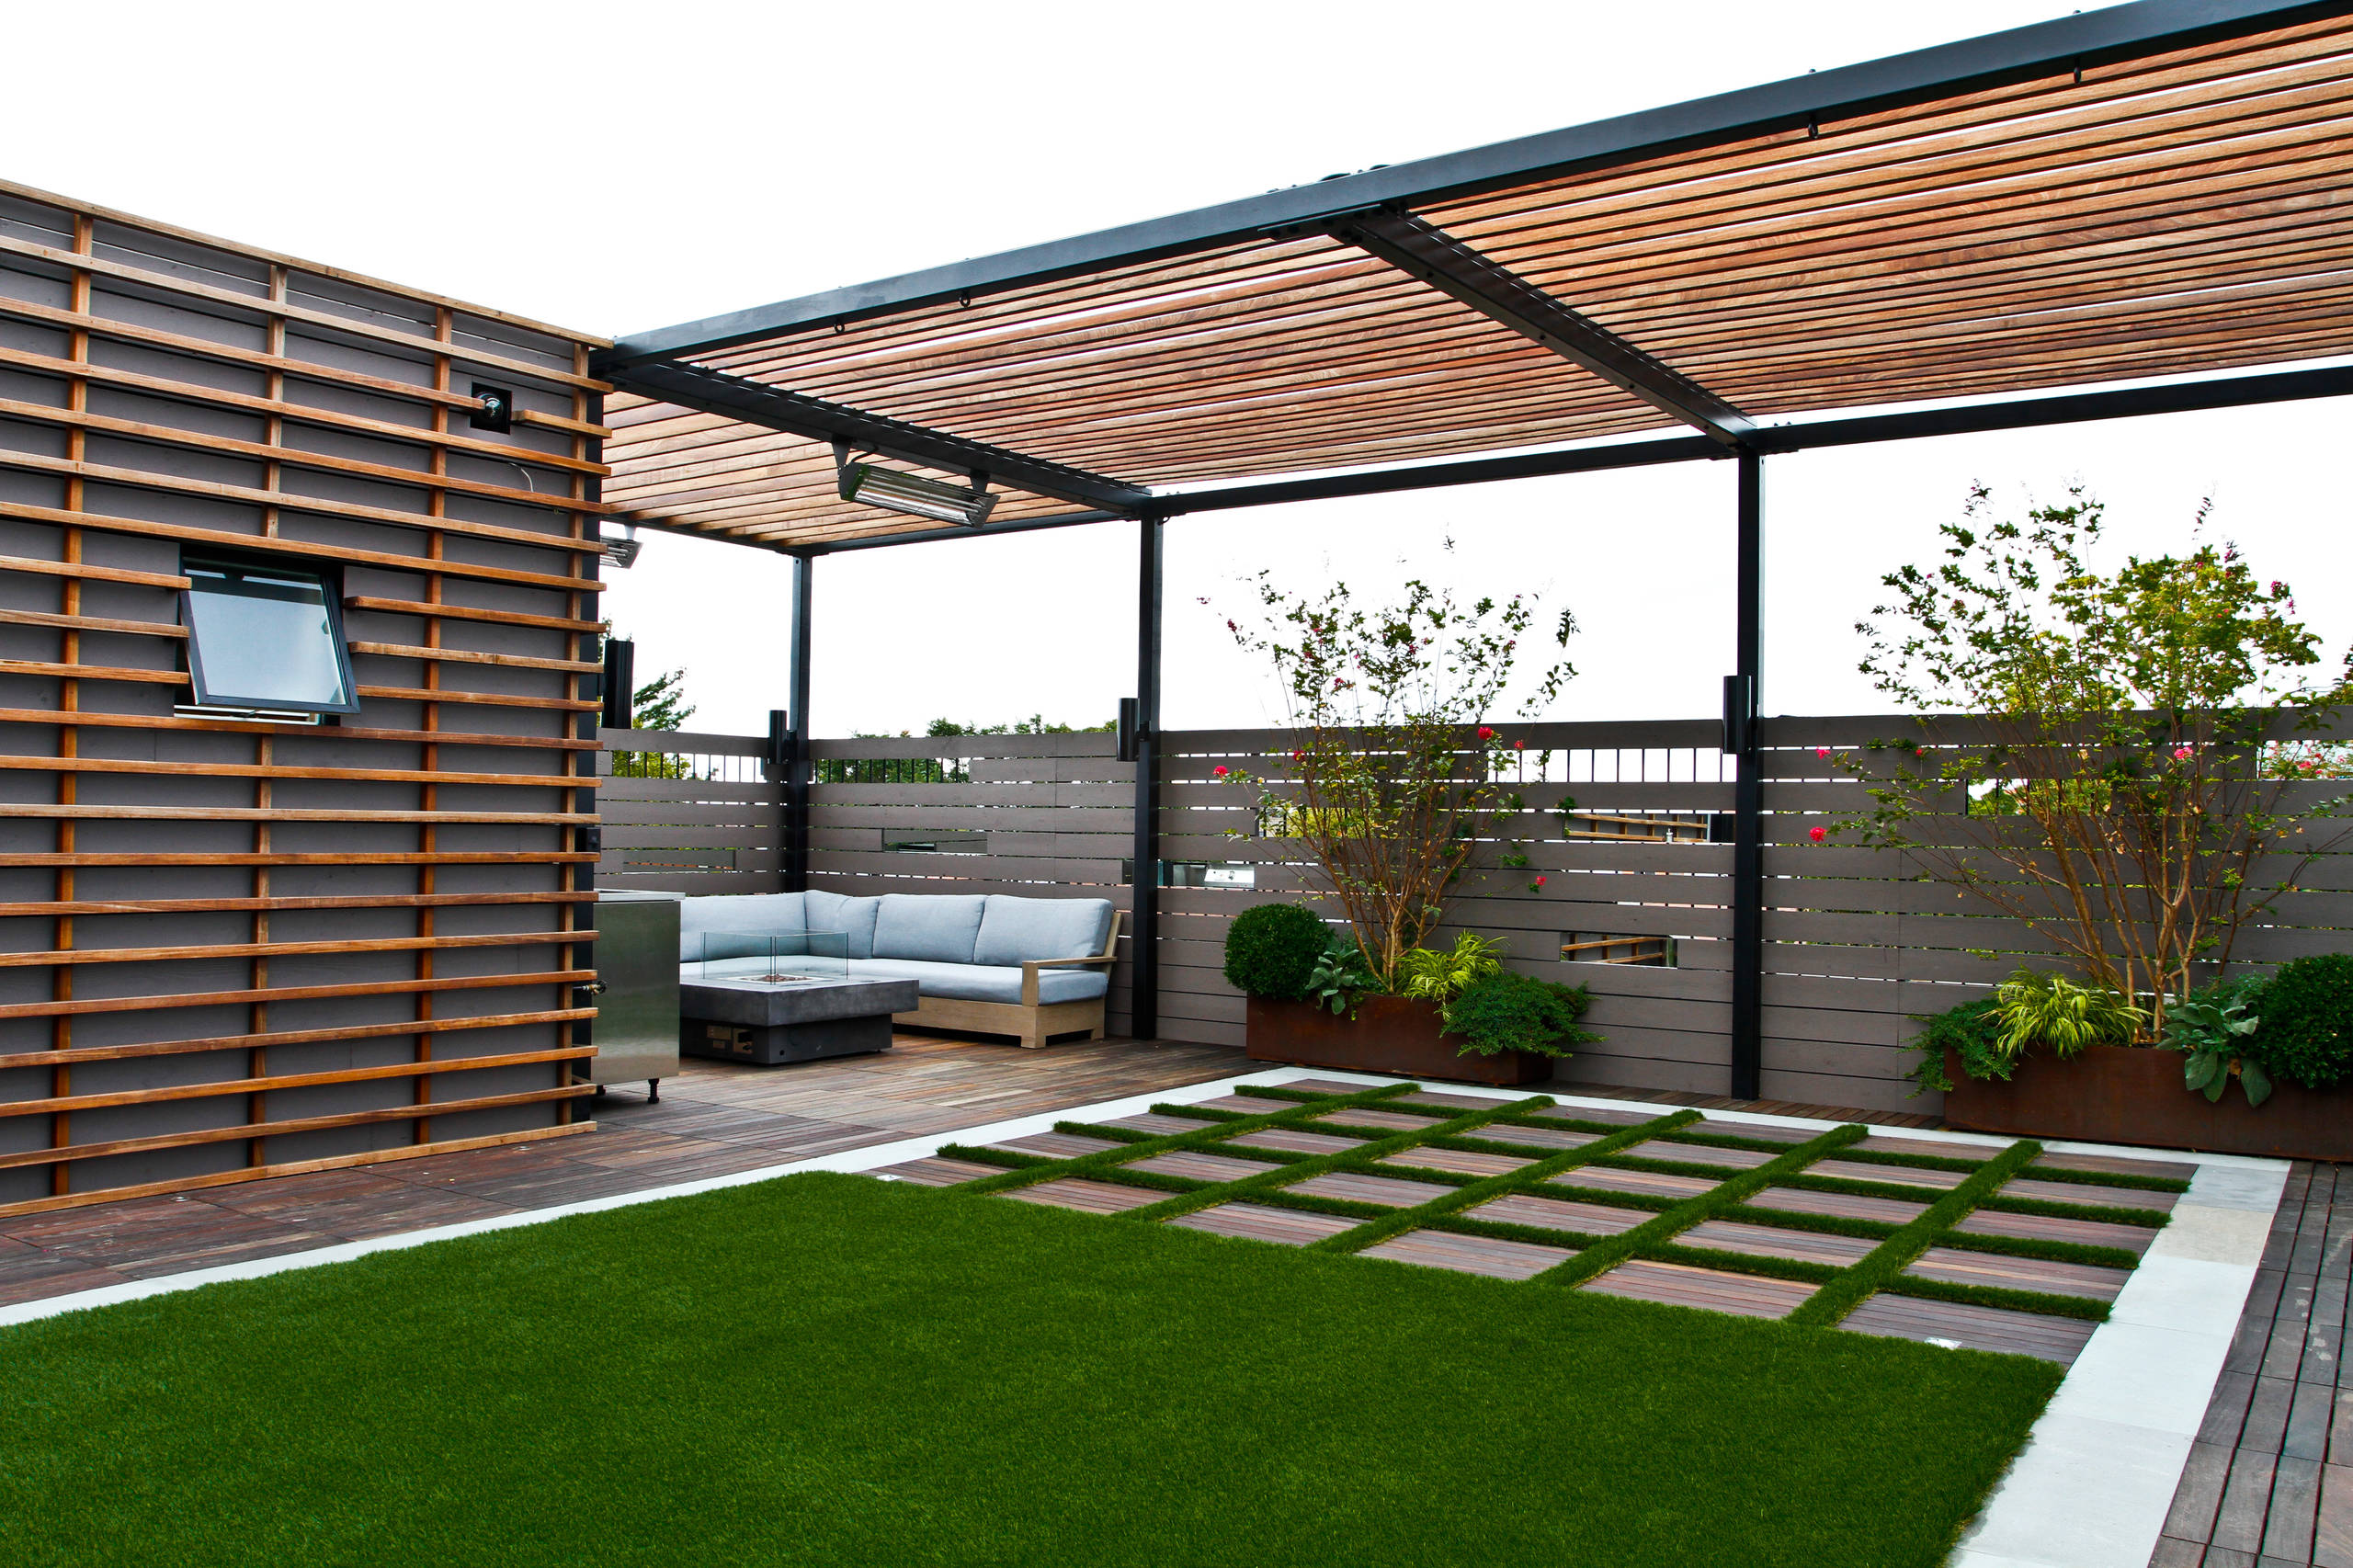 75 Rooftop Landscaping Ideas You'll Love - March, 2024